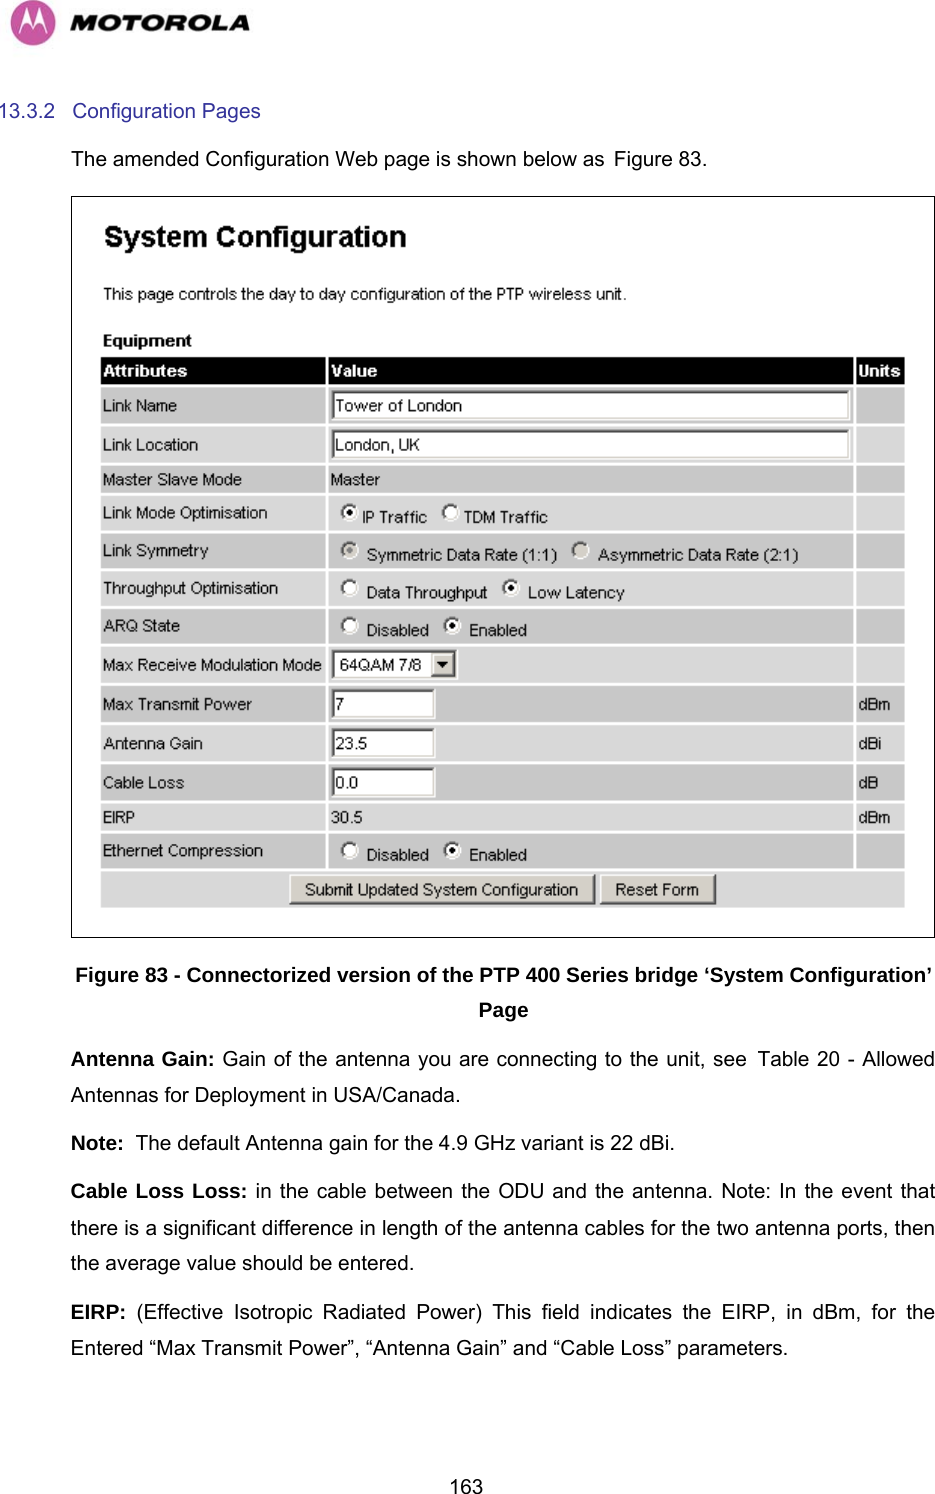   16313.3.2 Configuration Pages The amended Configuration Web page is shown below as HFigure 83.  Figure 83 - Connectorized version of the PTP 400 Series bridge ‘System Configuration’ Page Antenna Gain: Gain of the antenna you are connecting to the unit, see HTable 20 - Allowed Antennas for Deployment in USA/Canada. Note:  The default Antenna gain for the 4.9 GHz variant is 22 dBi. Cable Loss Loss: in the cable between the ODU and the antenna. Note: In the event that there is a significant difference in length of the antenna cables for the two antenna ports, then the average value should be entered. EIRP:  (Effective Isotropic Radiated Power) This field indicates the EIRP, in dBm, for the Entered “Max Transmit Power”, “Antenna Gain” and “Cable Loss” parameters.  